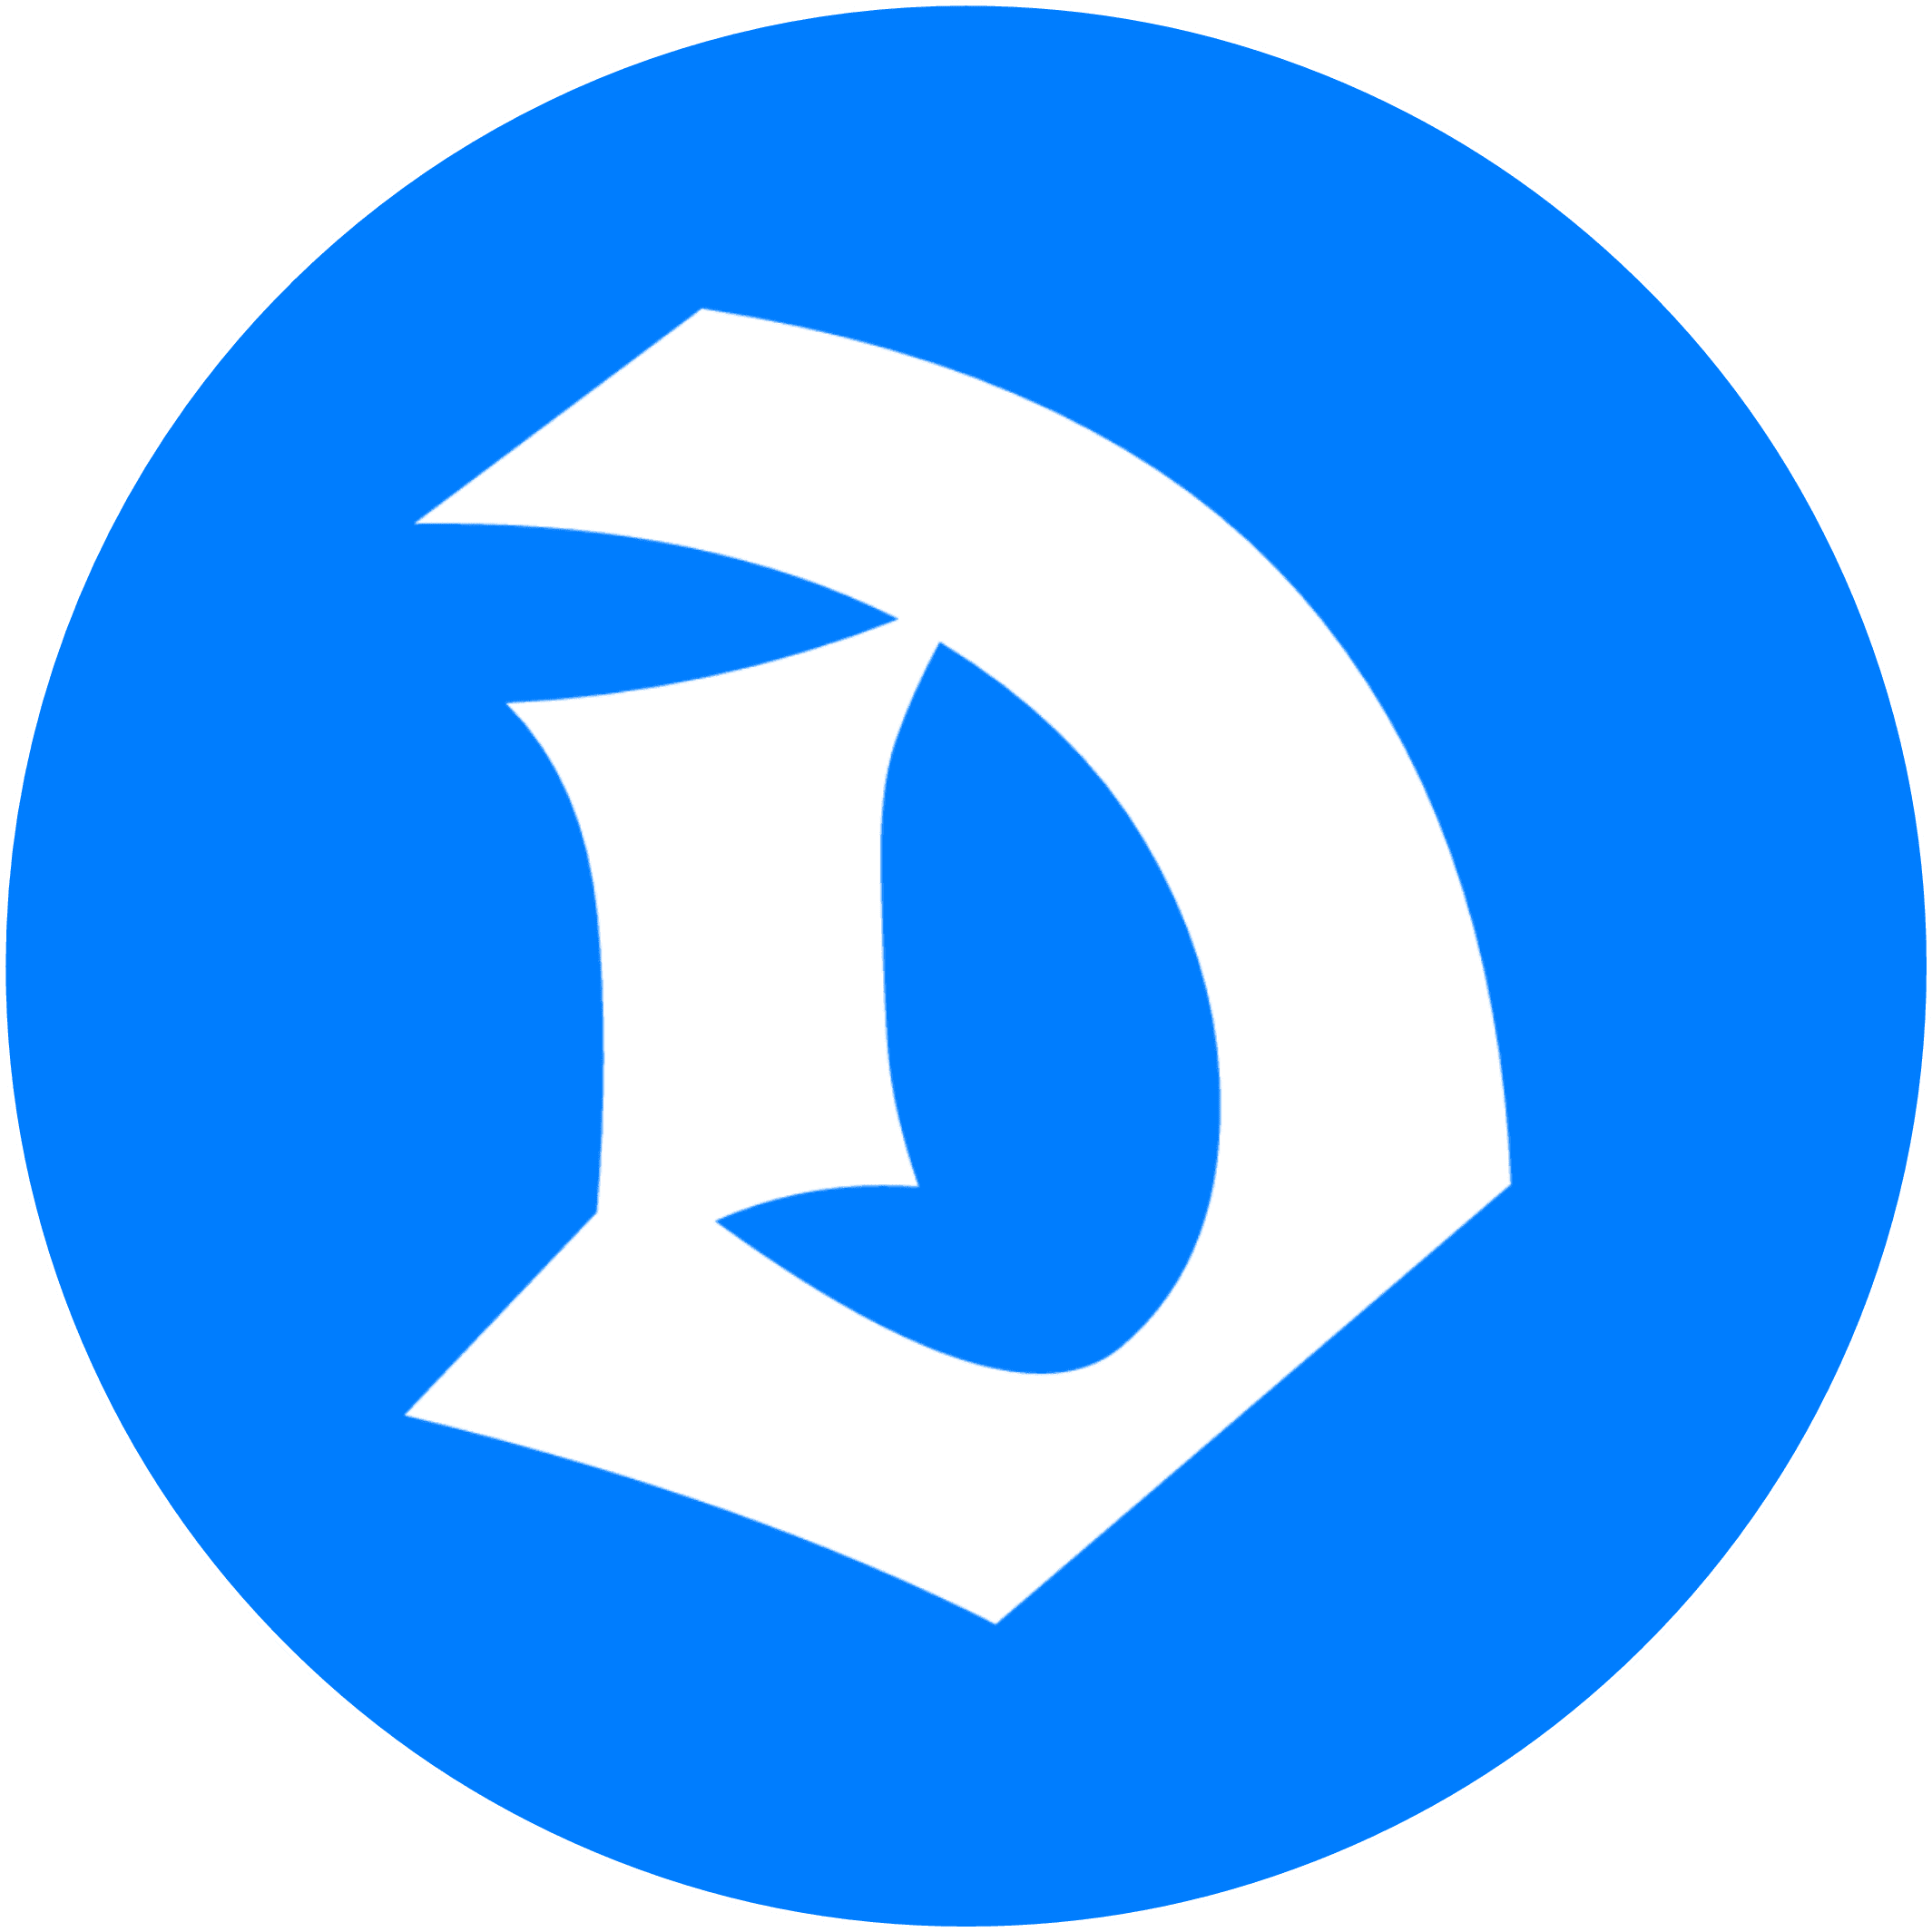 Directify